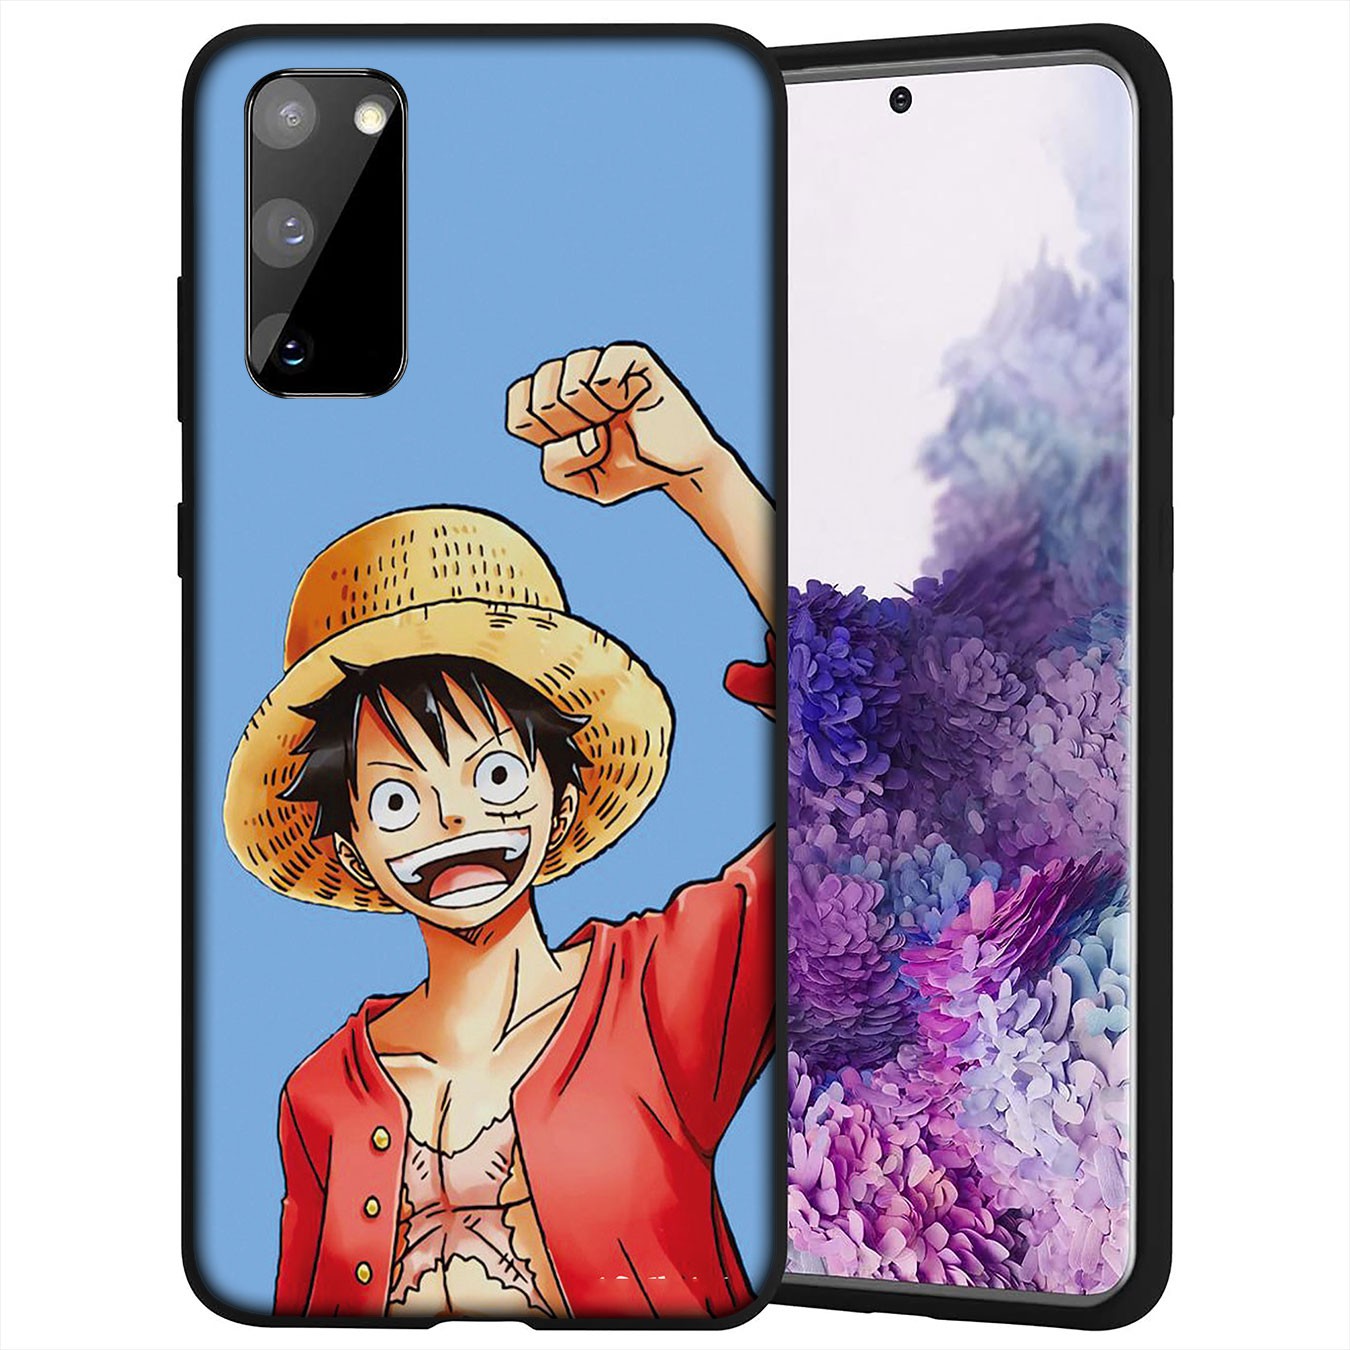 Samsung Galaxy A02S J2 J4 J5 J6 Plus J7 Prime A02 M02 j6+ A42 + Casing Soft Silicone luffy One Piece Phone Case